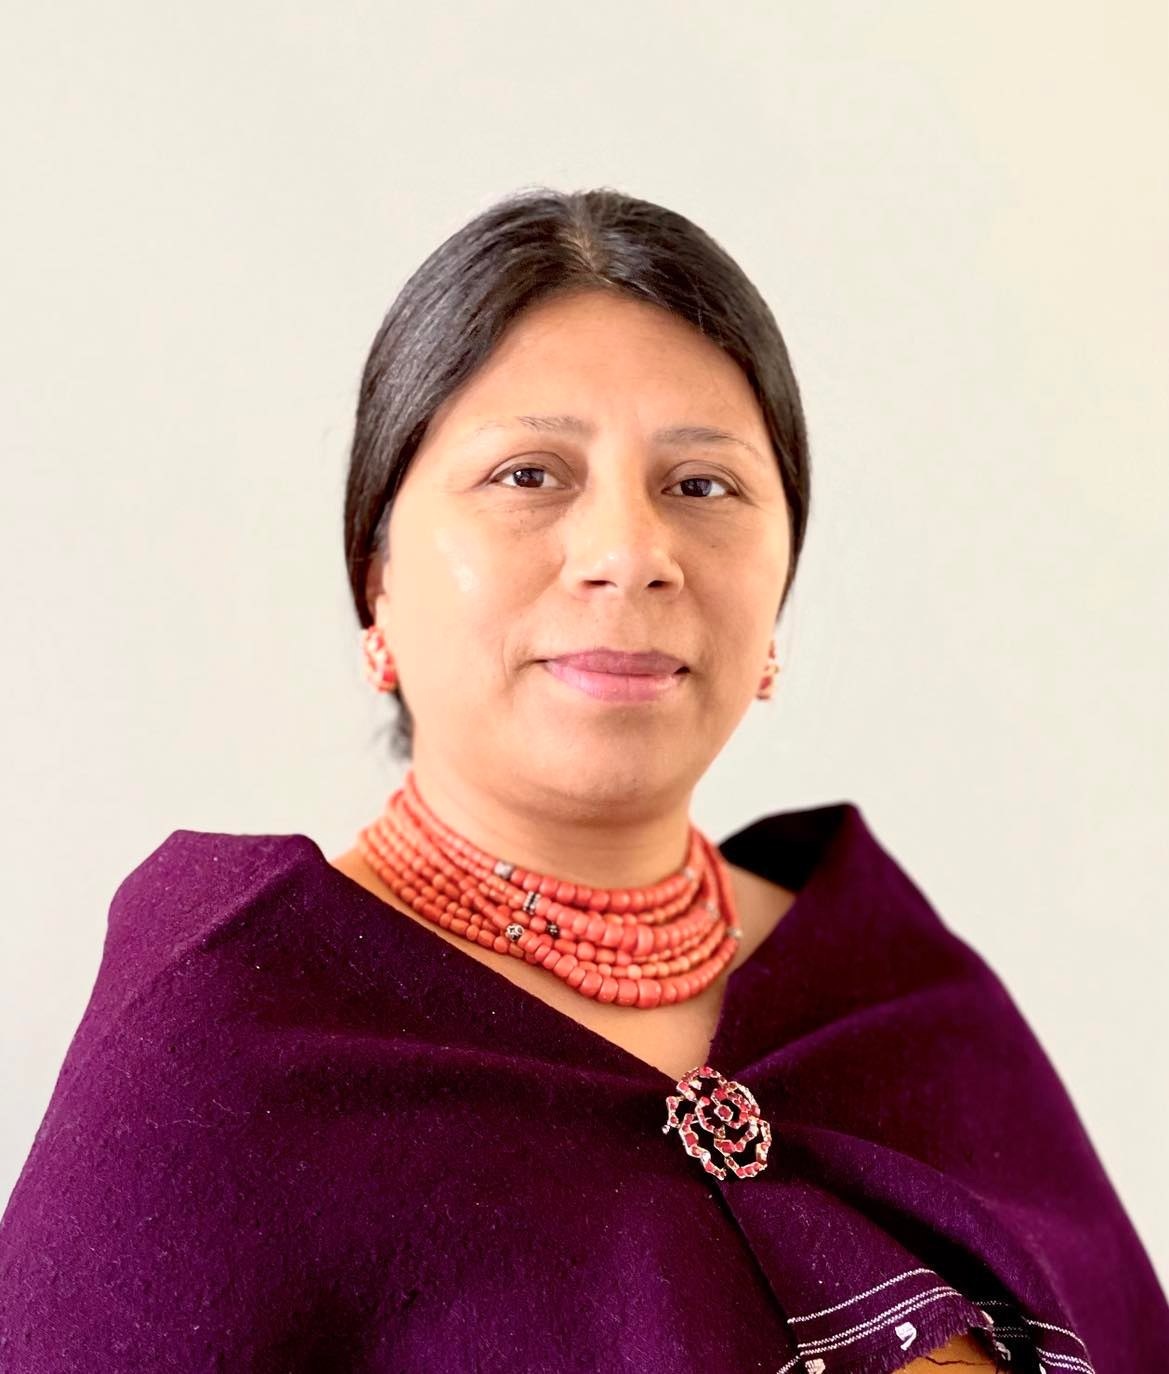 A portrait of Mirian Masaquiza Jerez, an Indigenous Kichwa woman from Ecuador. Her hair is parted in the middle and pulled back smoothly behind her head. She wears a purple cape attached over her chest by a brooch along with a long beaded necklace wrapped in many strands around her neck.